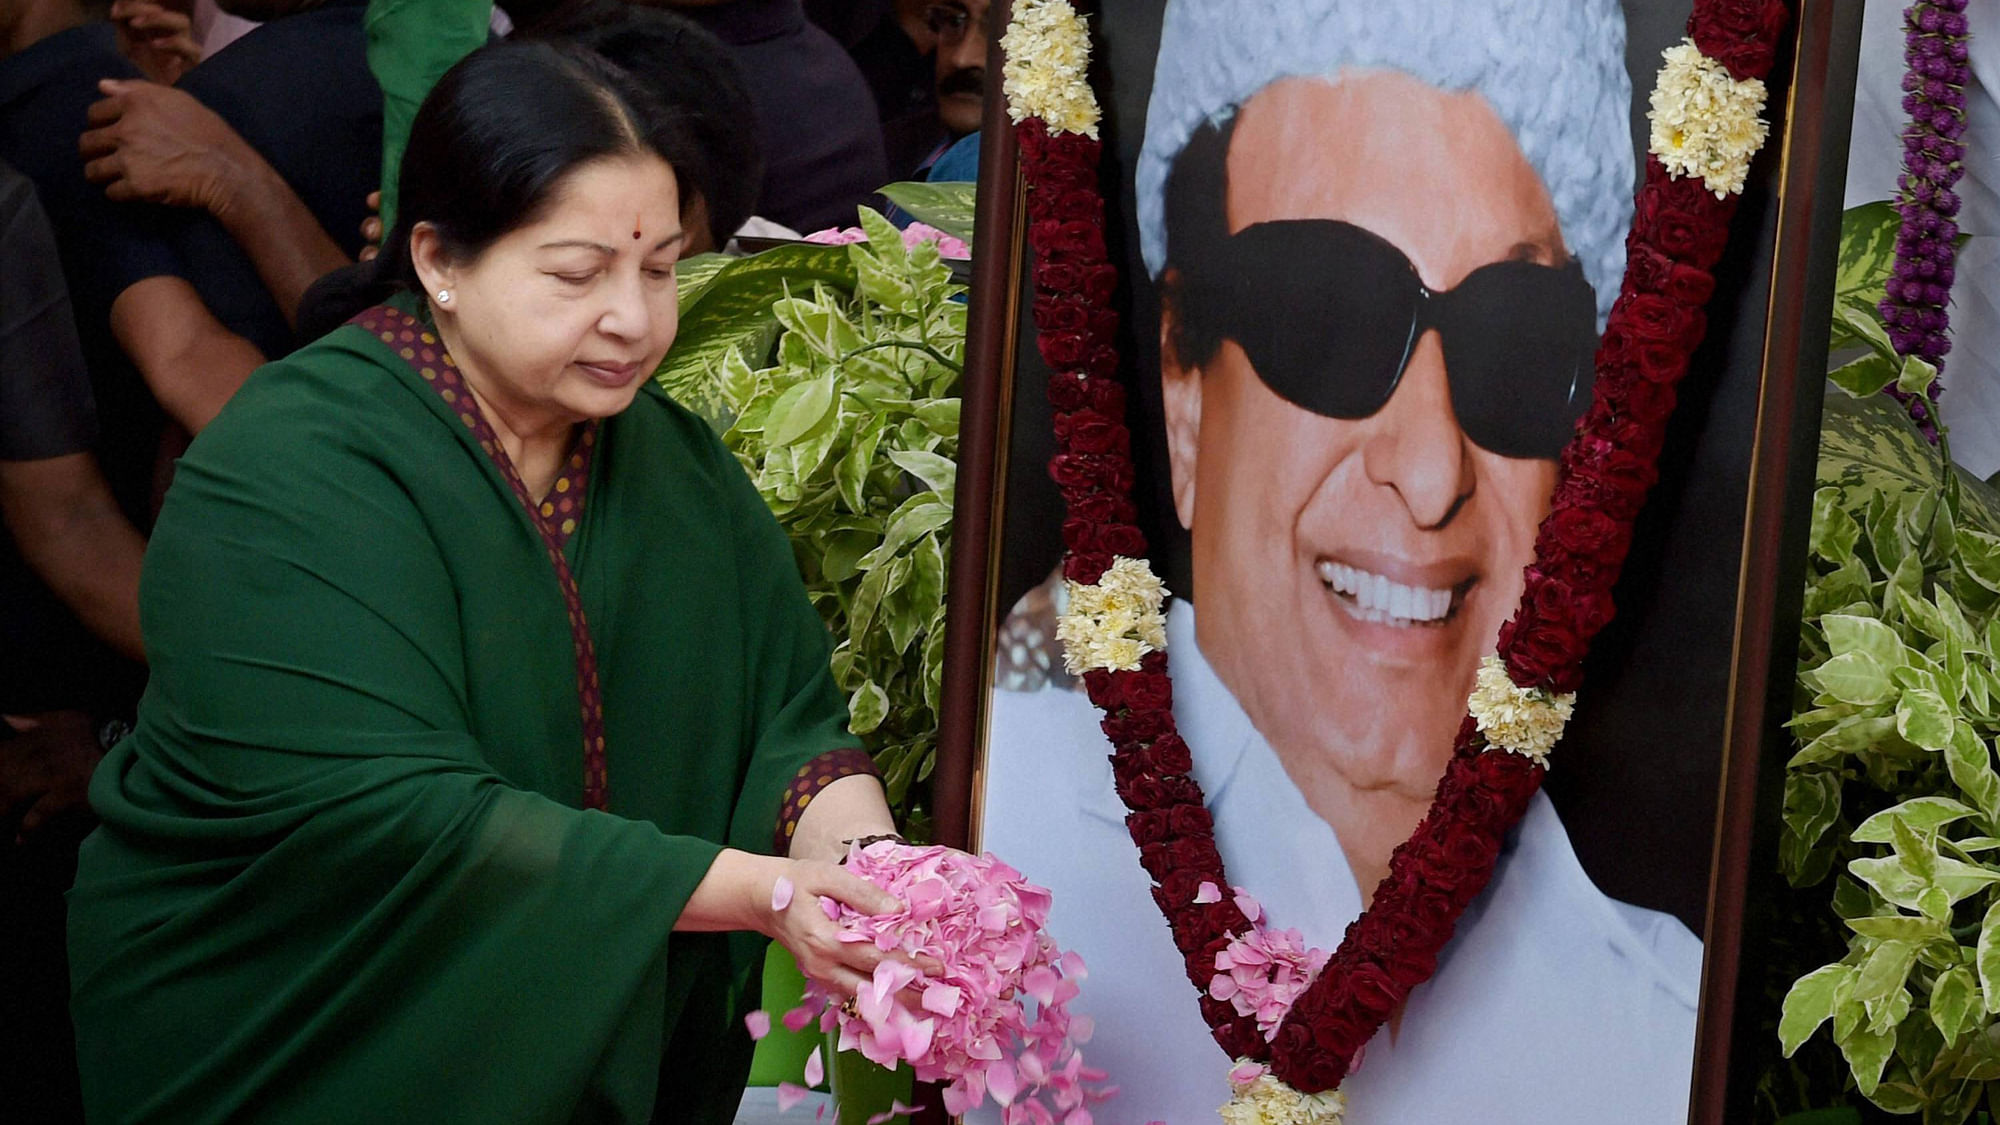 Jayalalithaa paying floral tribute to her mentor MGR in a file photo. (Photo: PTI)